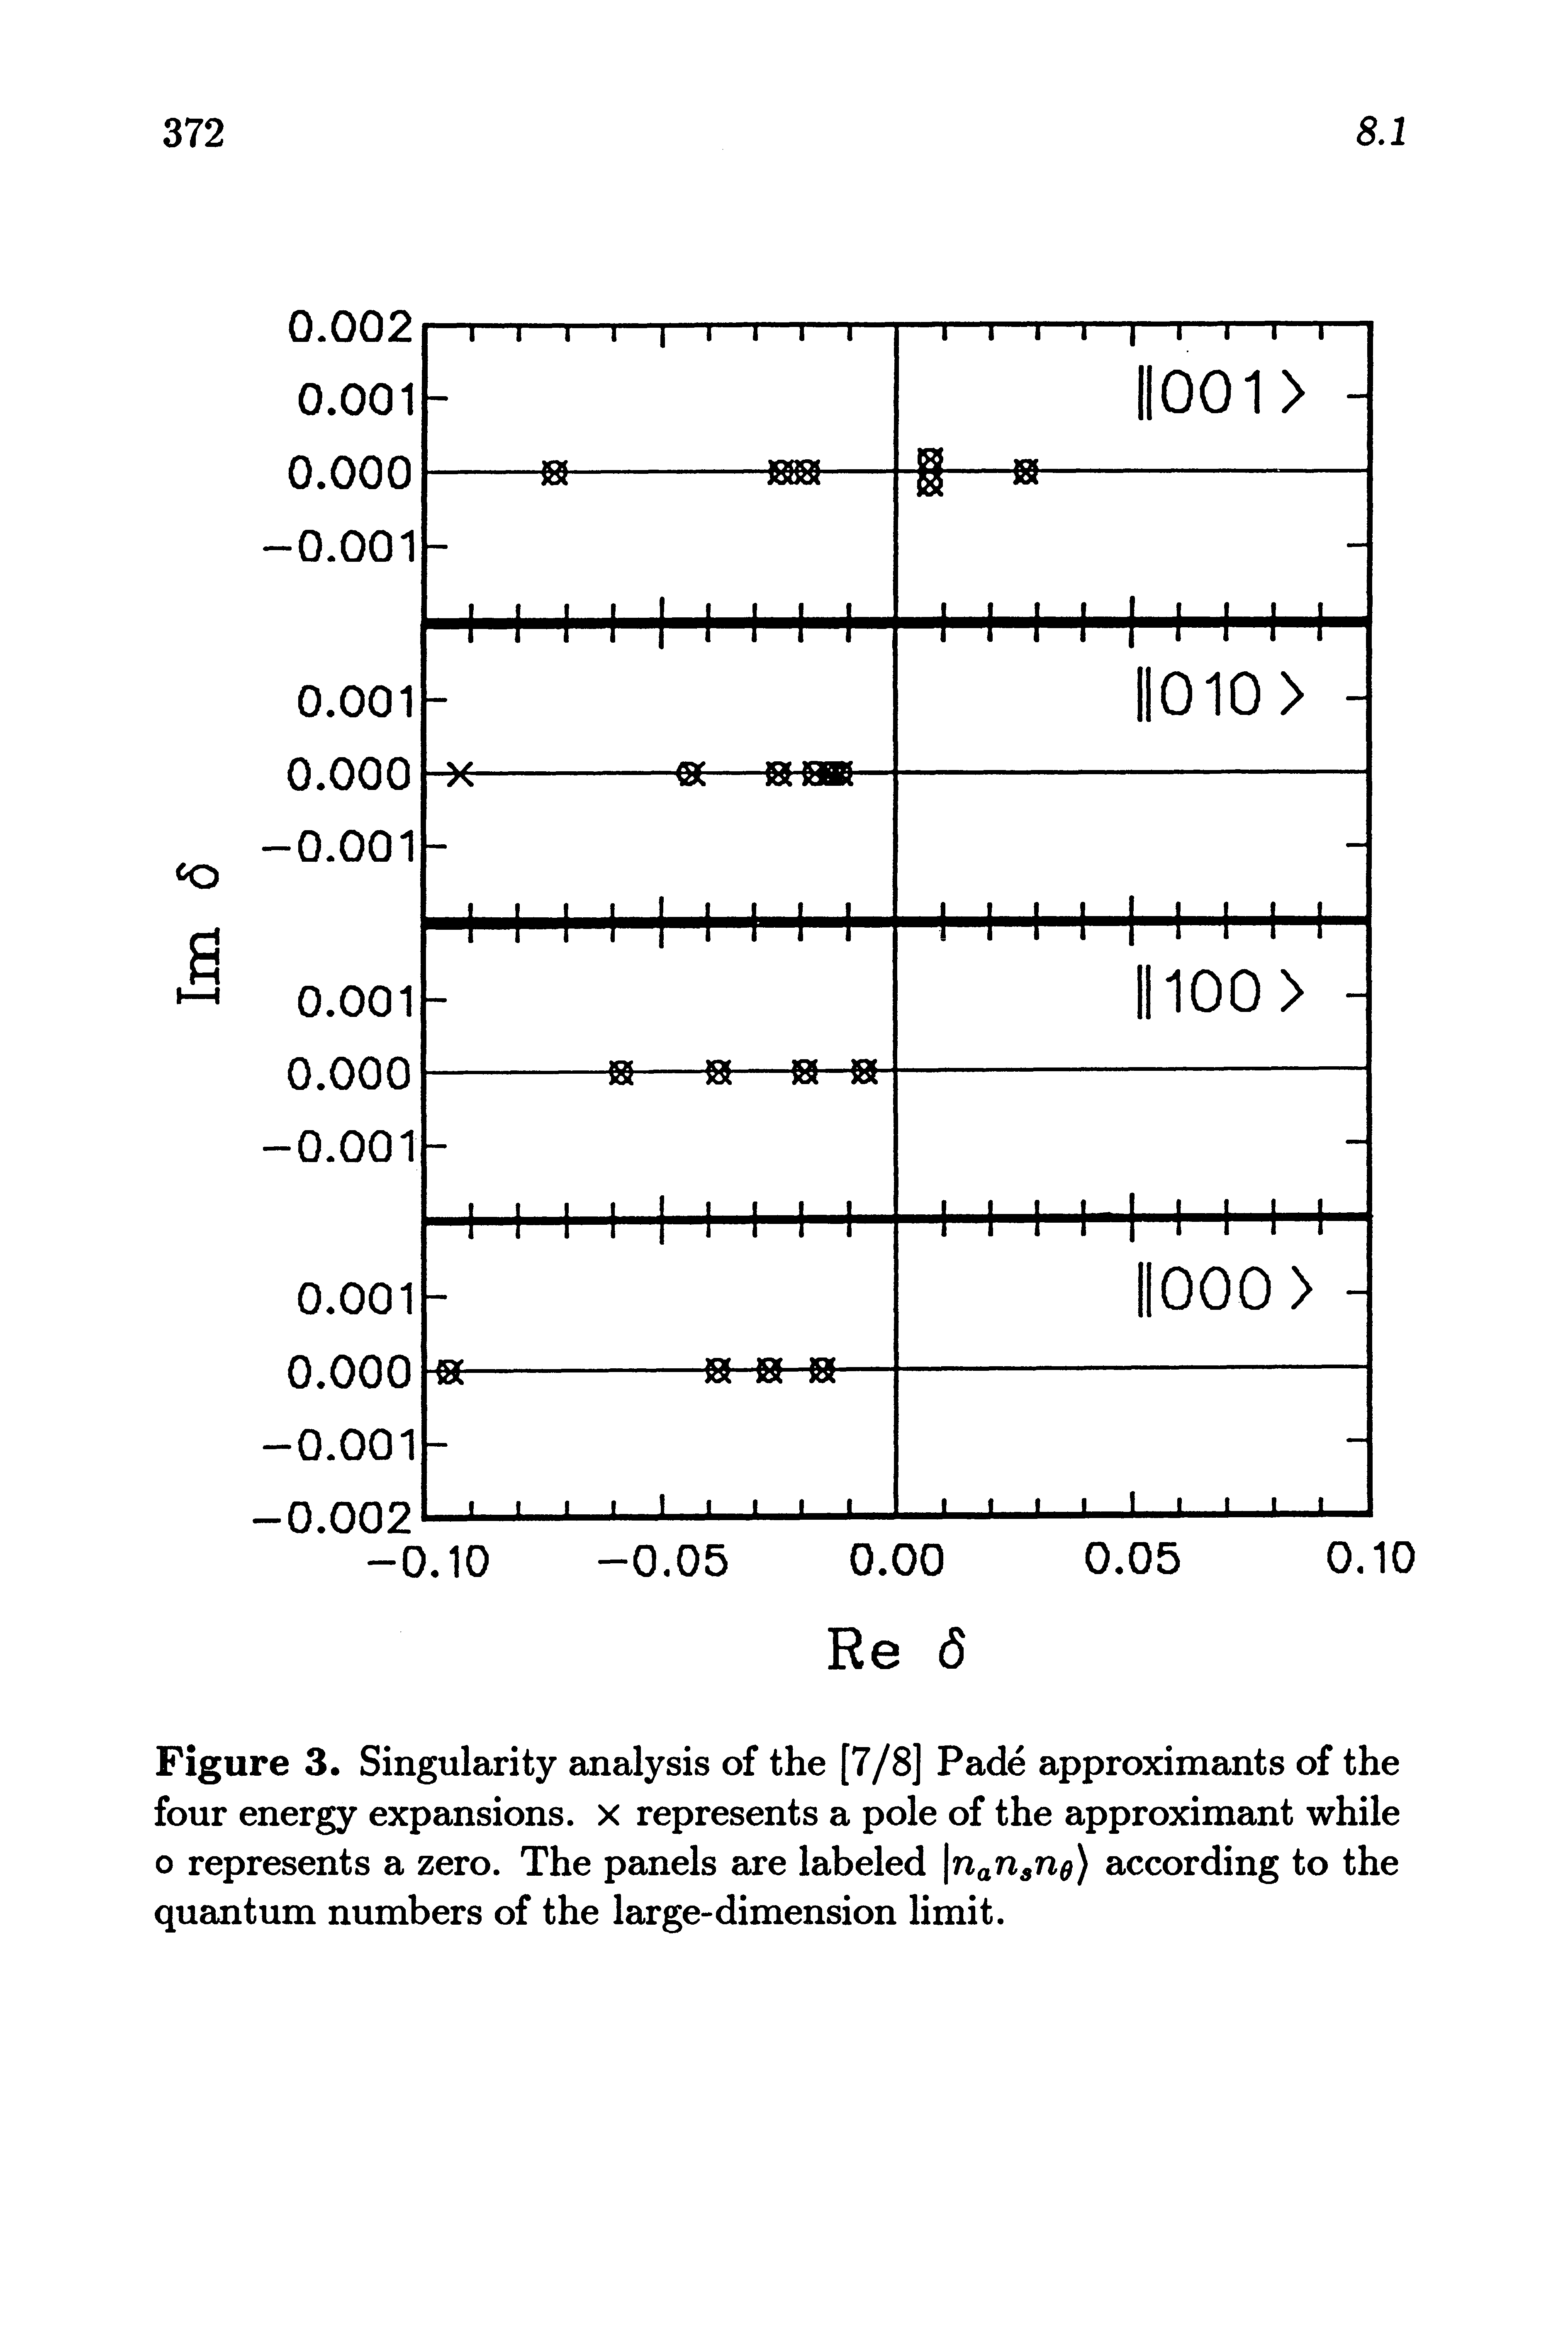 Figure 3. Singularity analysis of the [7/8] Fade approximants of the four energy expansions, x represents a pole of the approximant while o represents a zero. The panels are labeled Inan n ) according to the quantum numbers of the large-dimension limit.